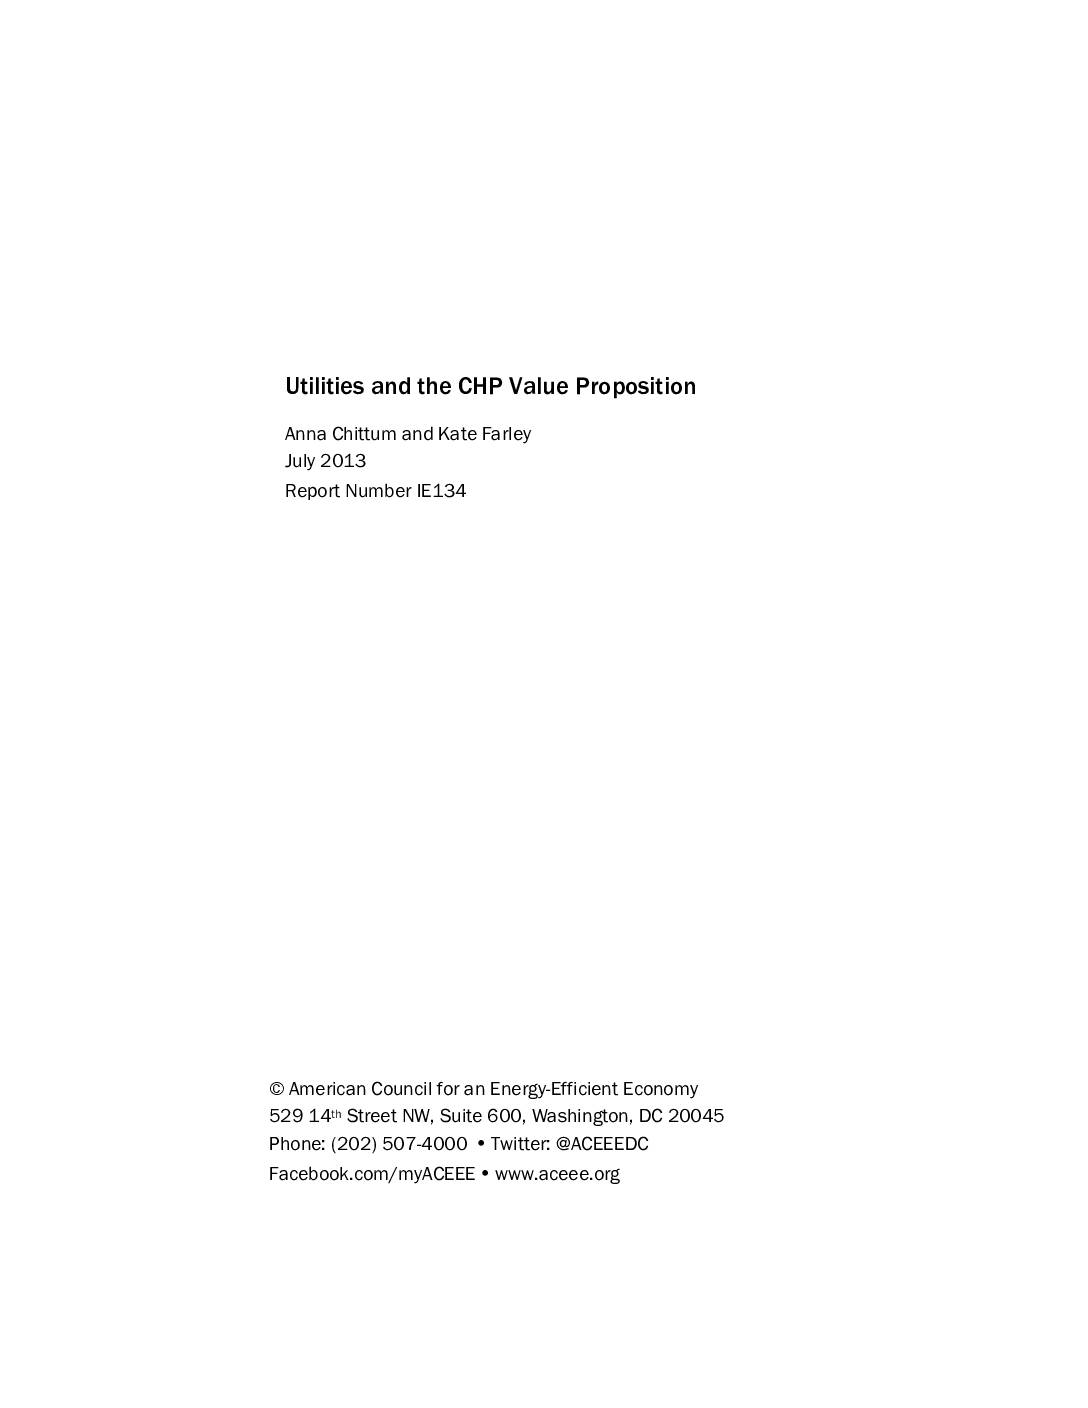 Utilities and the CHP Value Proposition